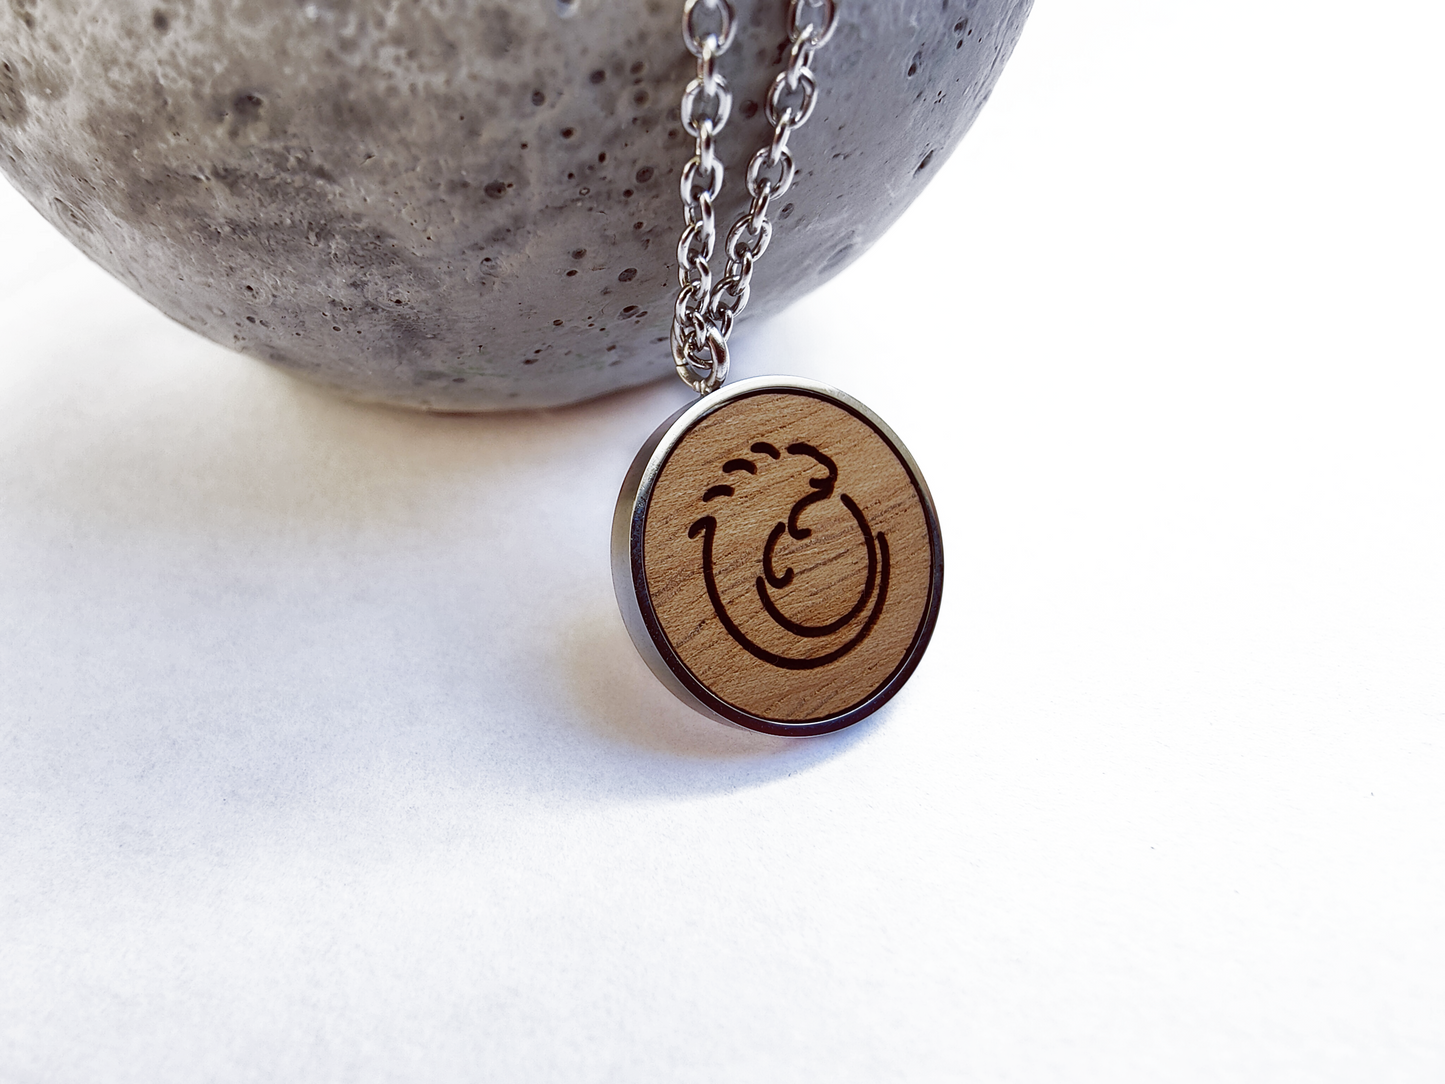 Nut wood iguana pendant necklace with stainless steel chain. All our eco-friendly necklaces are delivered in FSC certified jewelry boxes with sustainable foam.